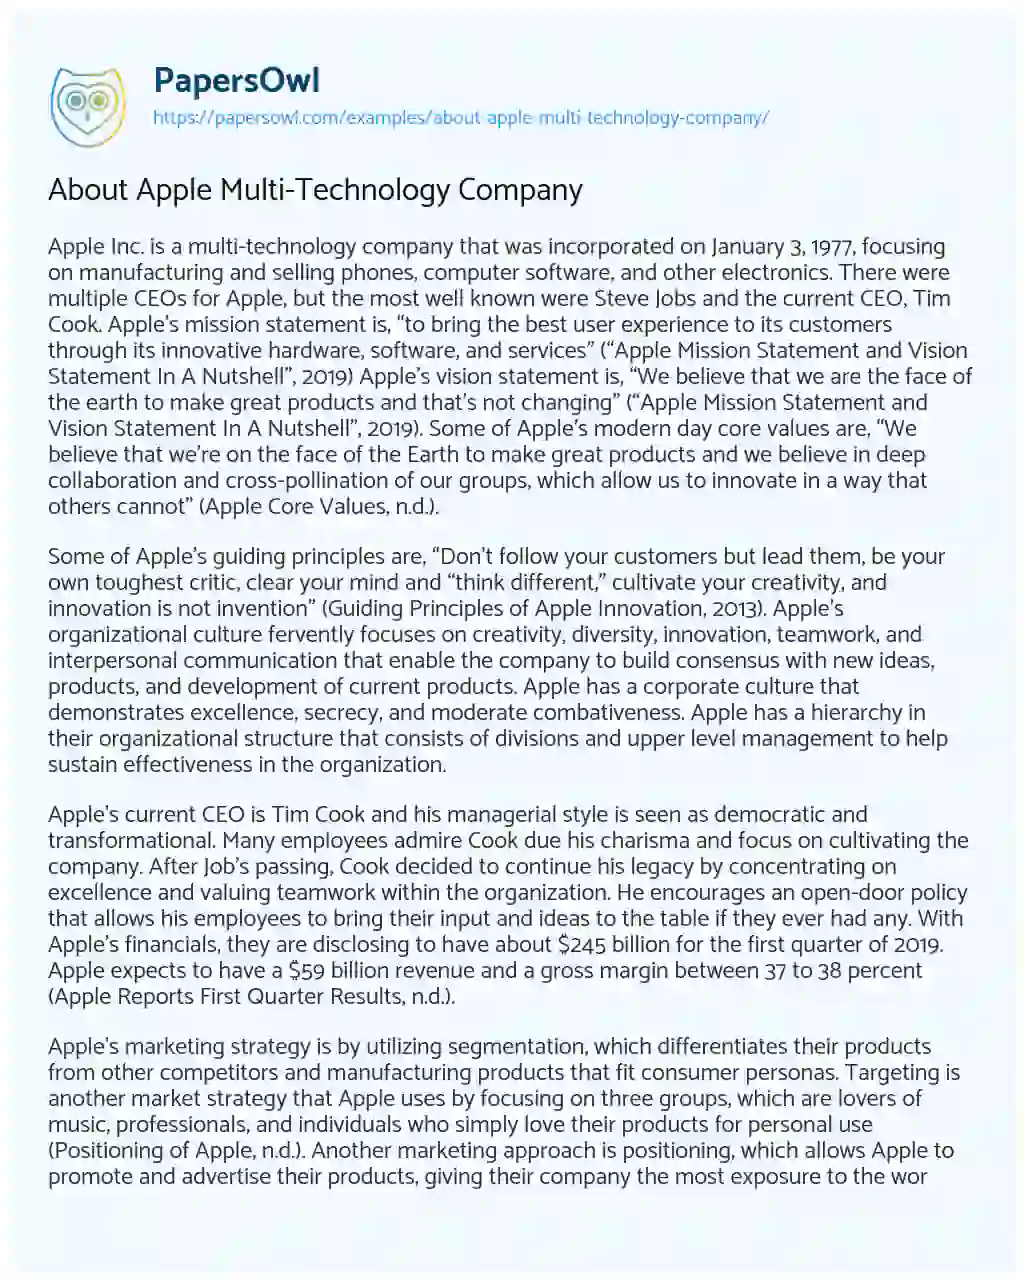 Essay on About Apple Multi-Technology Company